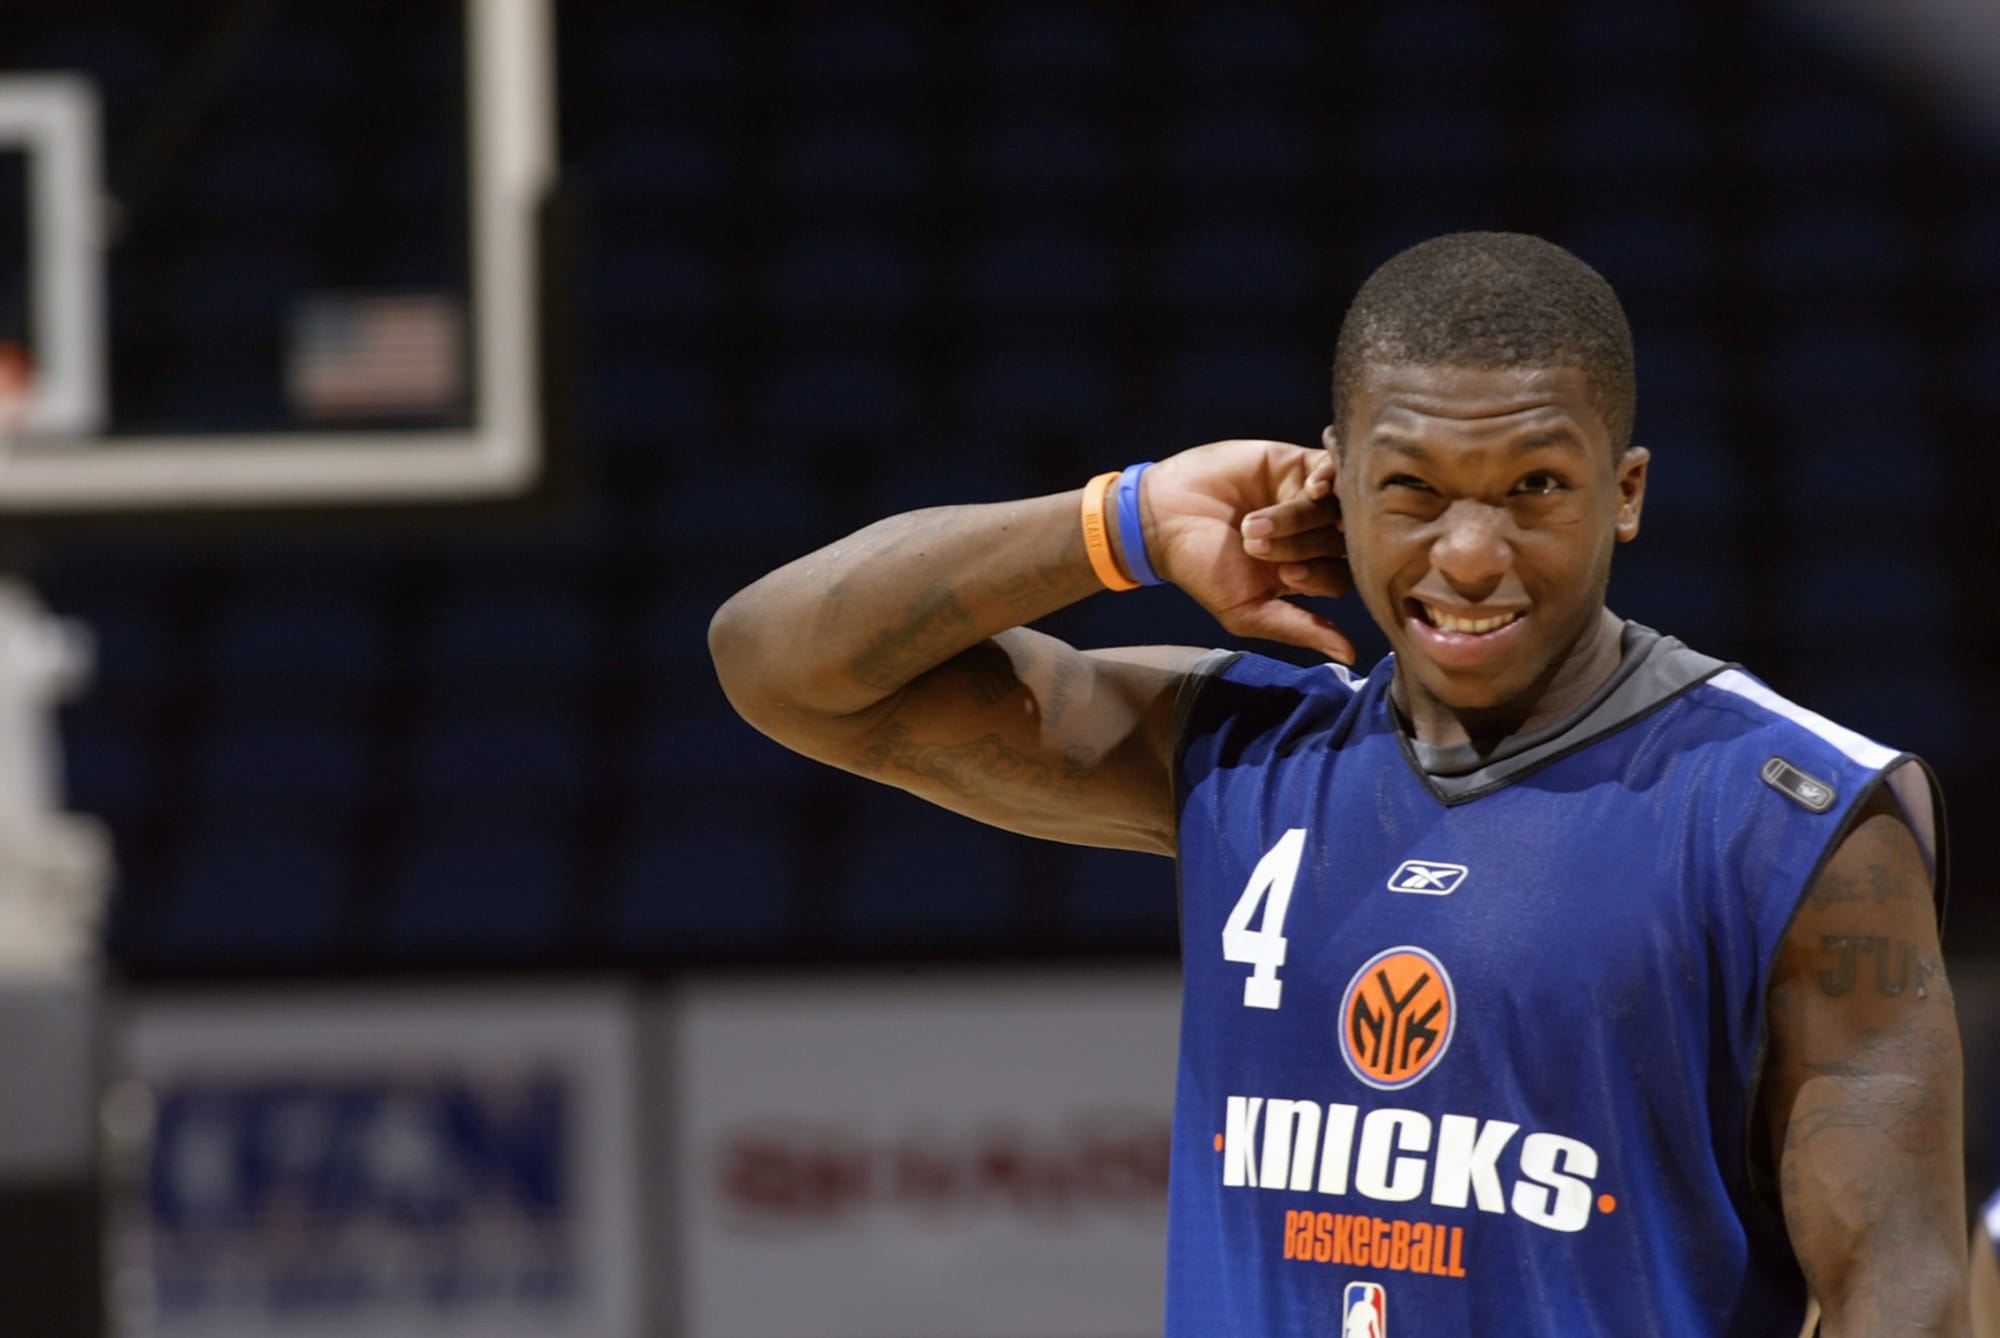 Nate Robinson Close to One-Year Deal With the Knicks - The New